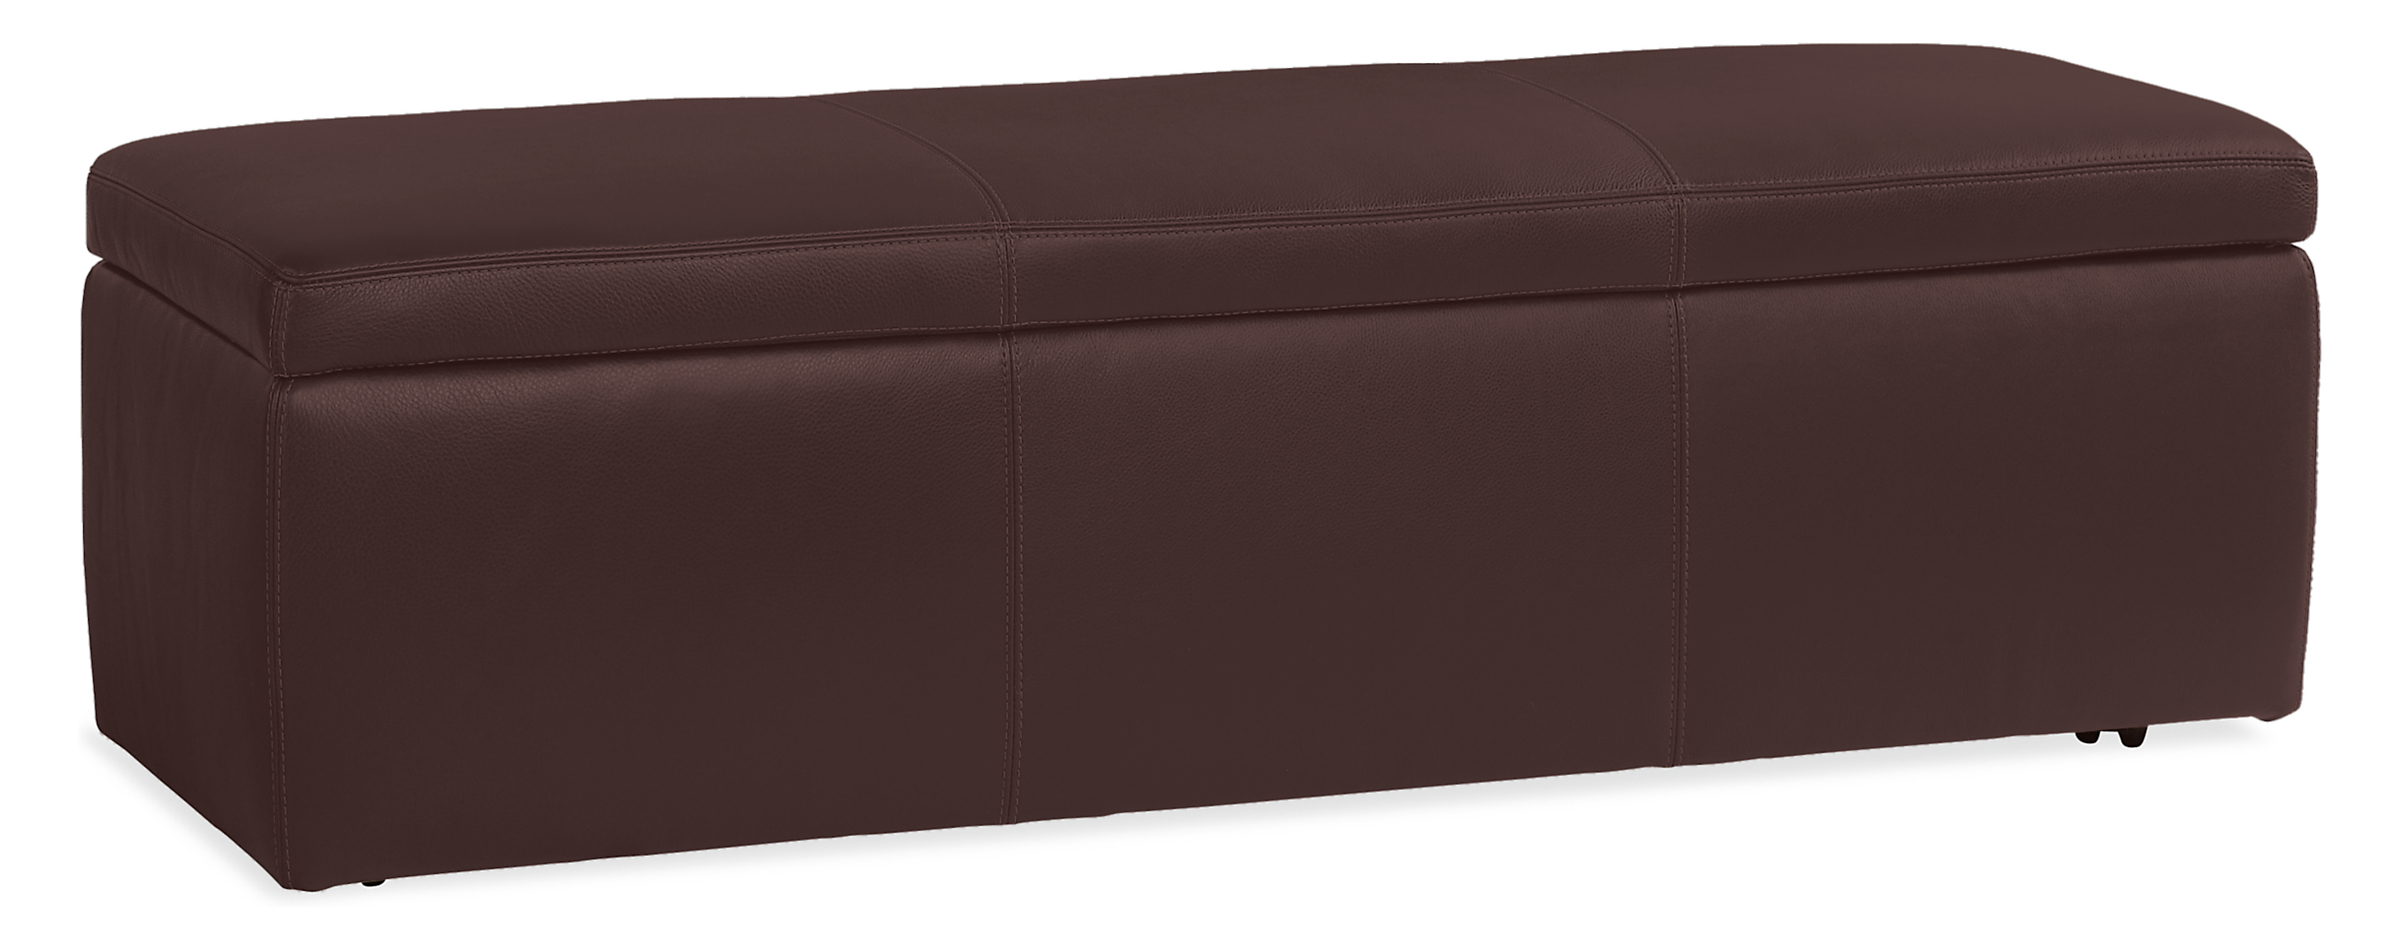 Tyler Leather Storage Benches